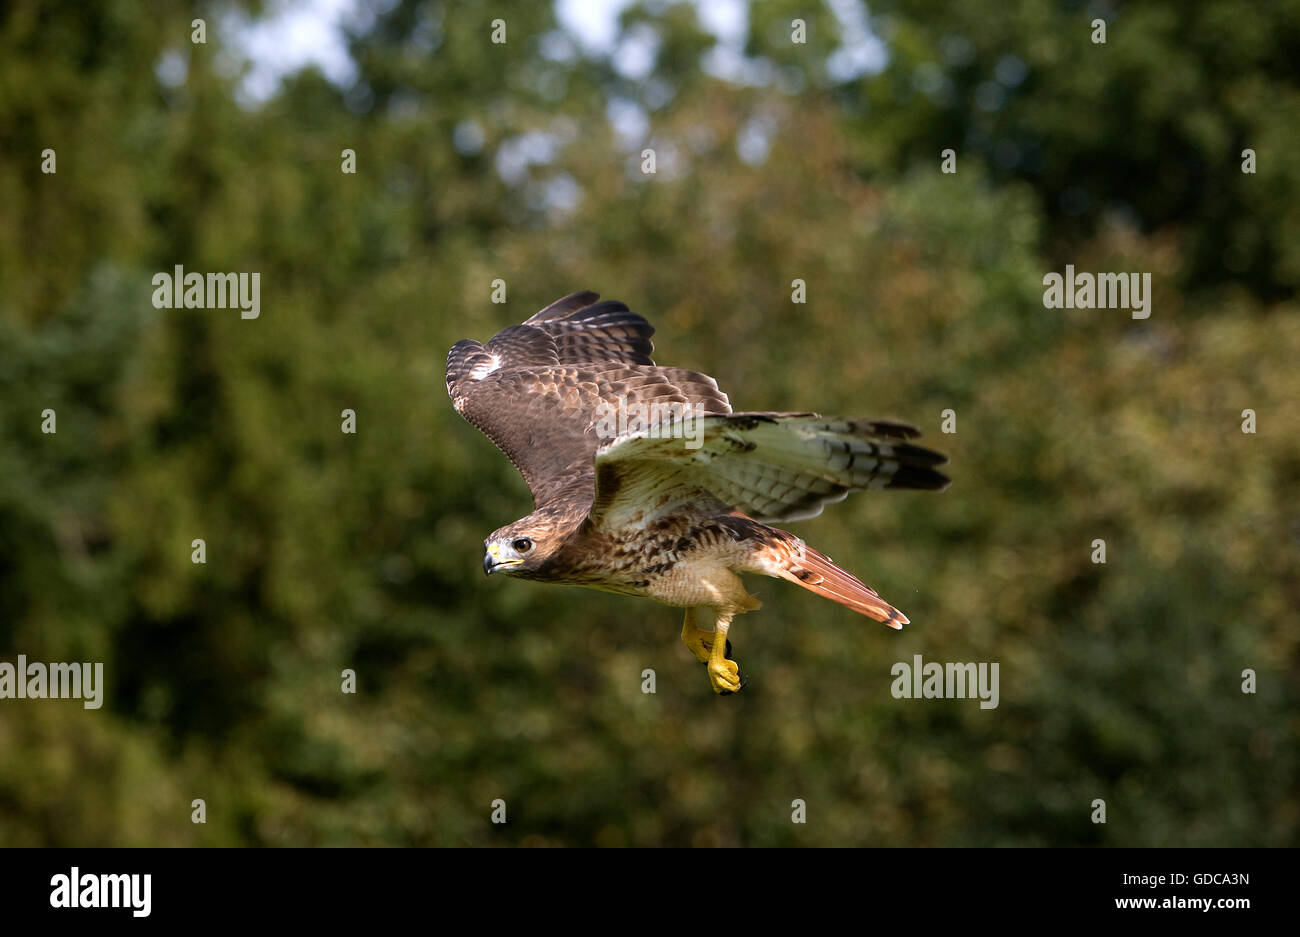 Red-Tailed Hawk, buteo jamaicensis, Adult in Flight Stock Photo